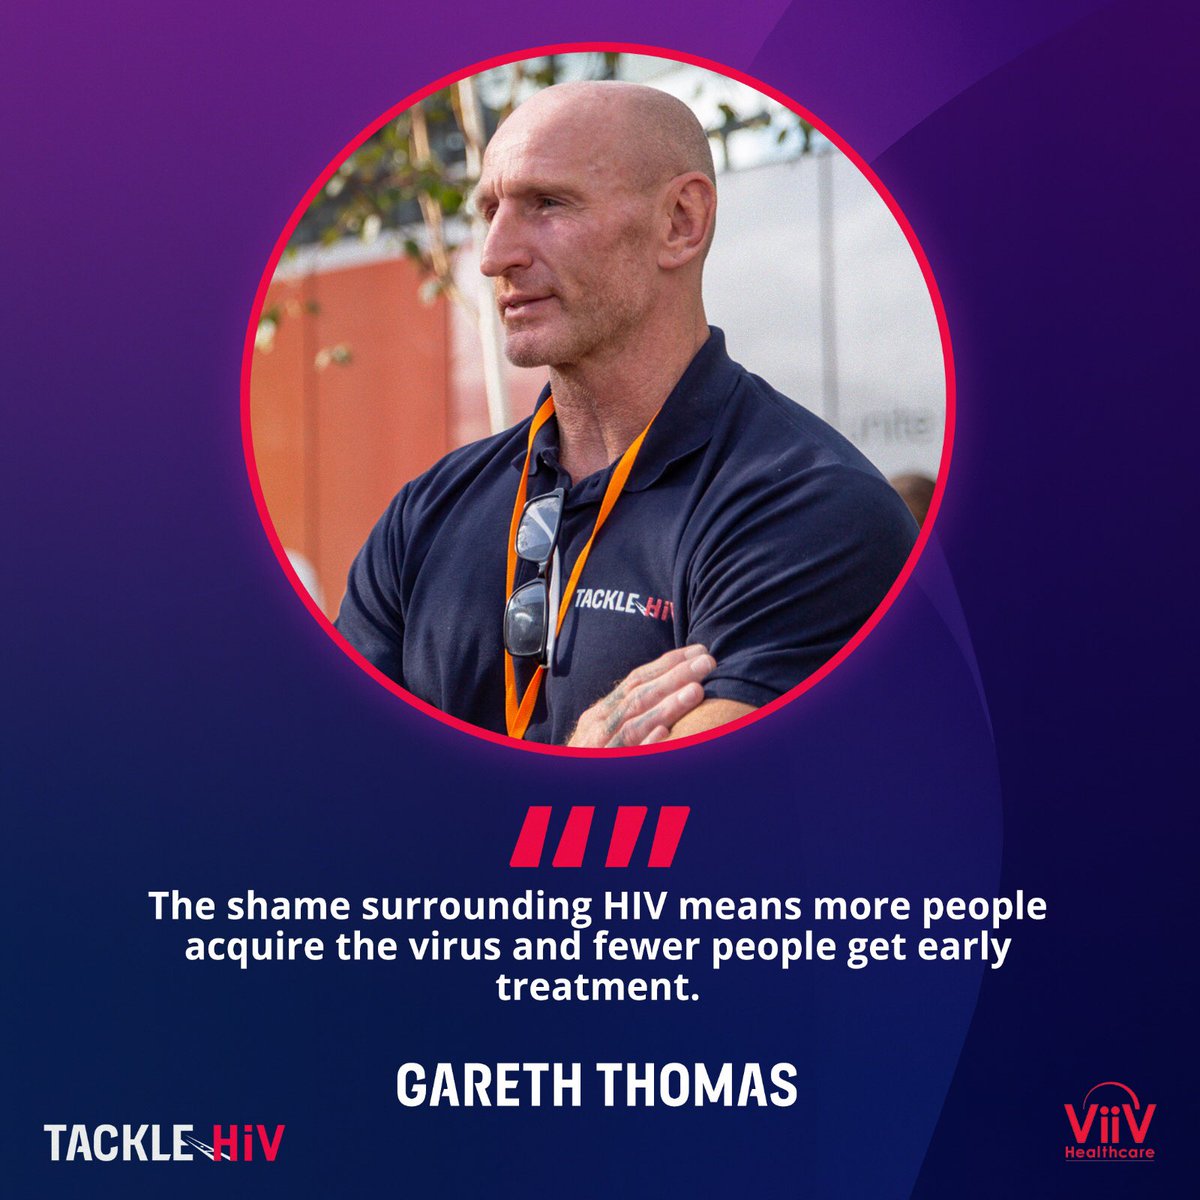 Being HIV positive is nothing to be ashamed of. Yet stigma undermines testing, treatment and prevention efforts. Addressing stigma is vital to help reach the goal of no new cases by 2030 🙏 @ViiVHC